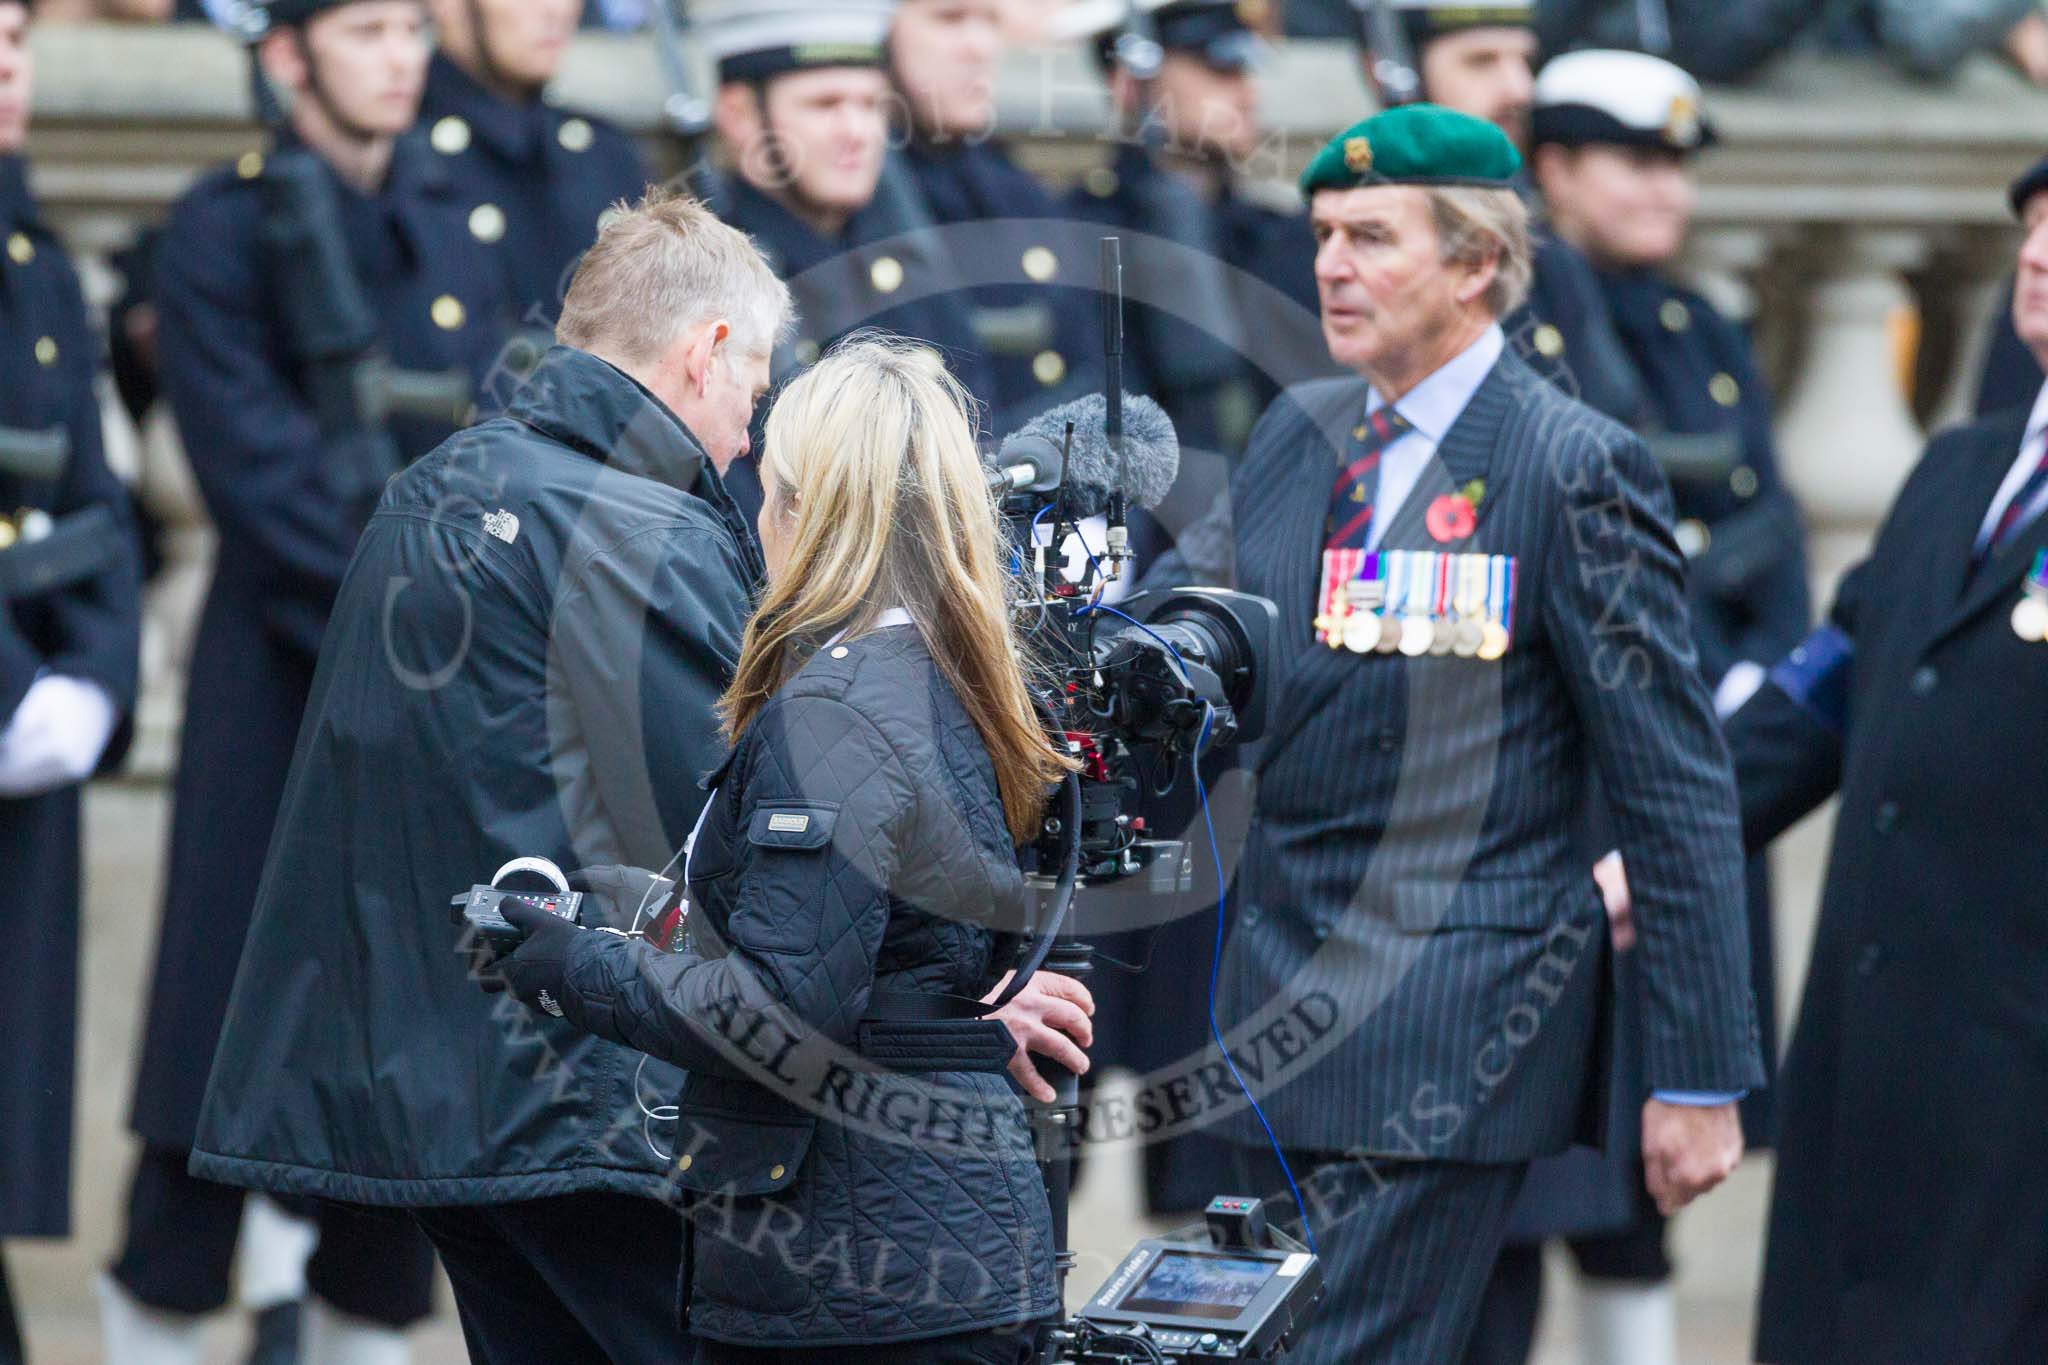 Remembrance Sunday at the Cenotaph 2015: Group B6, Royal Engineers Bomb Disposal Association (Anniversary) walking with the BBC steadycam for the live broadcast.
Cenotaph, Whitehall, London SW1,
London,
Greater London,
United Kingdom,
on 08 November 2015 at 11:37, image #43